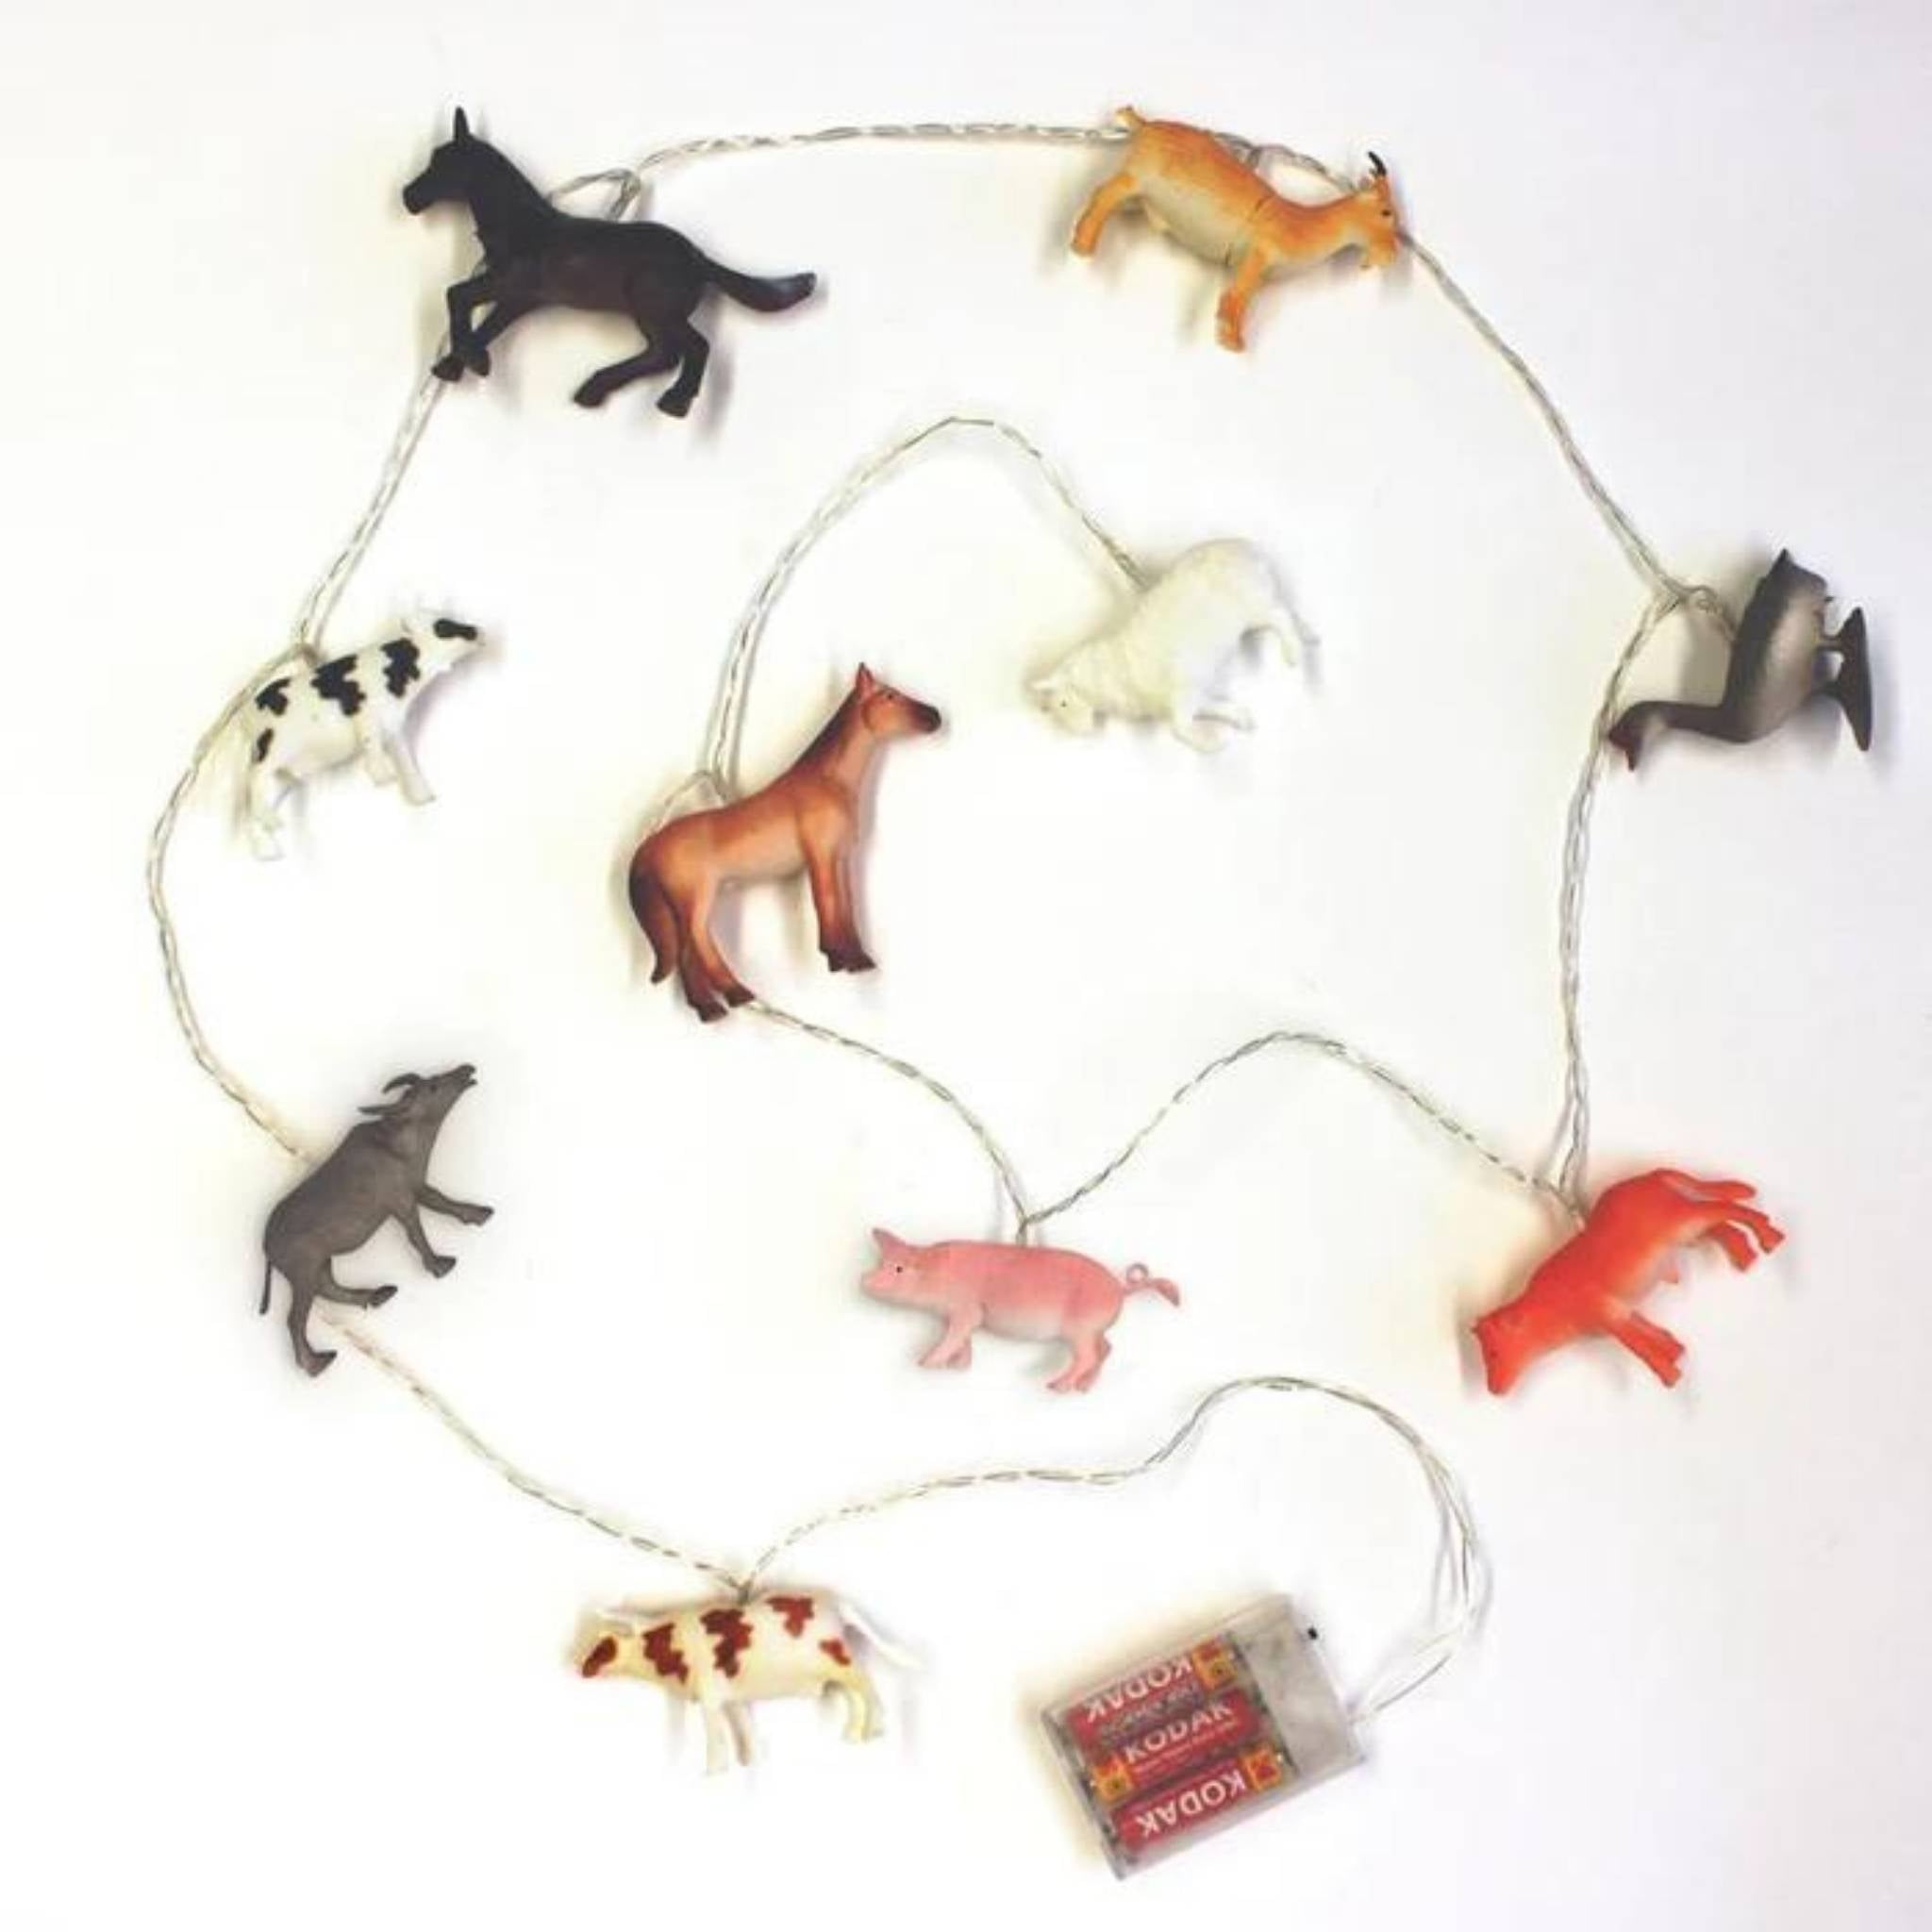 String Lights With Farm Animals